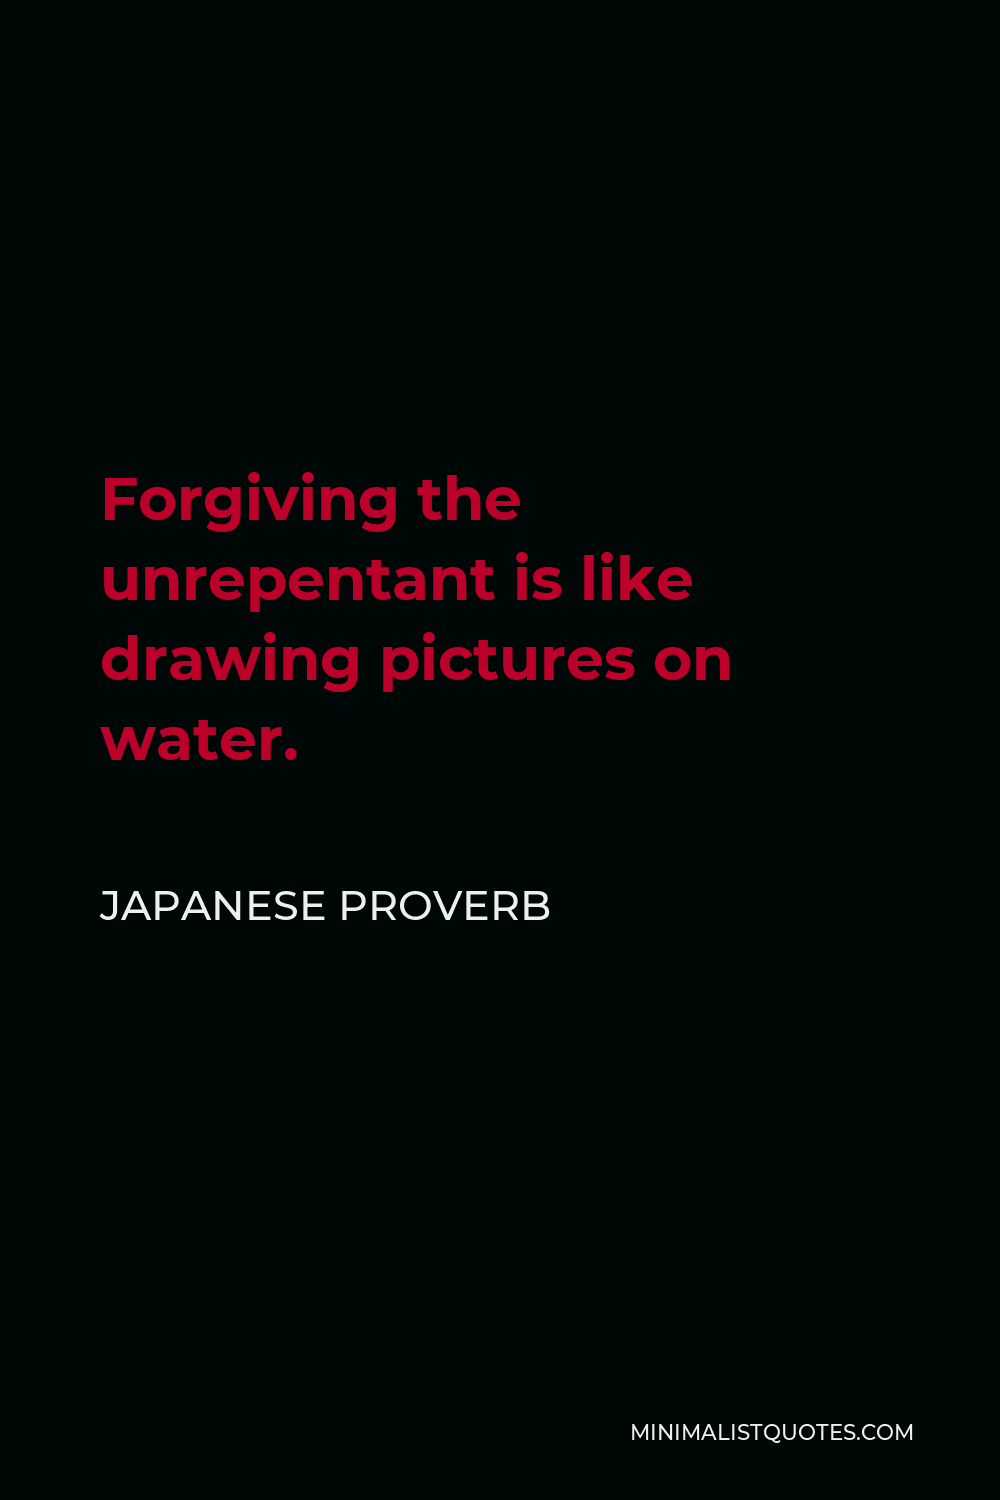 Japanese Proverb Quote - Forgiving the unrepentant is like drawing pictures on water.